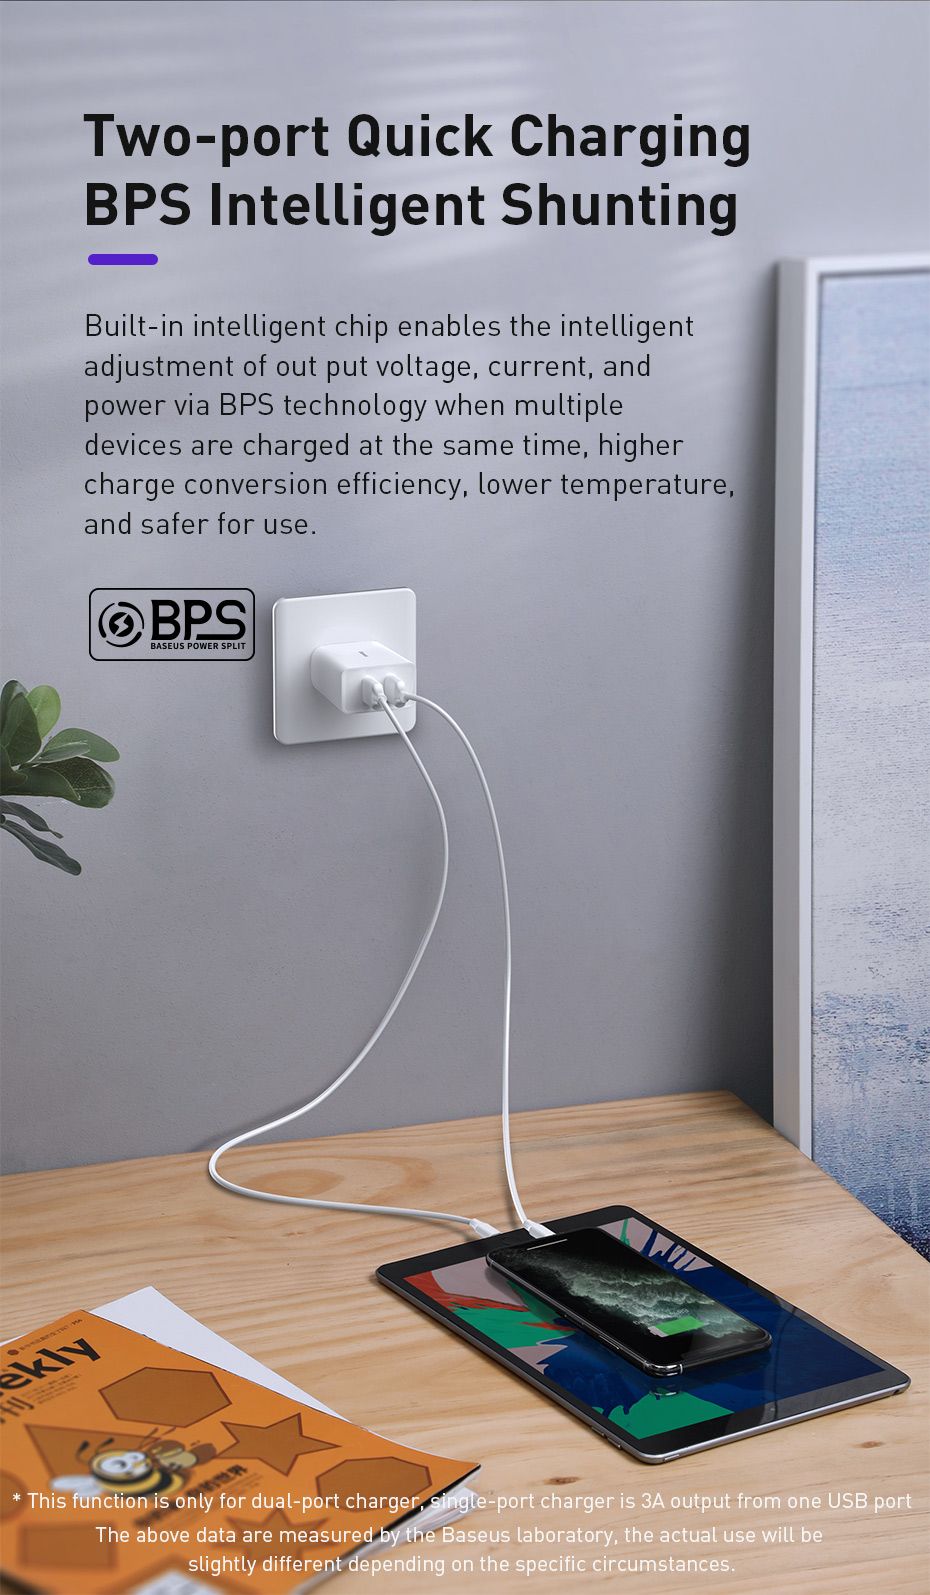 Baseus-TC-012-3A-18W-QC30-Smart-Dual-USB-Quick-Charge-Wall-Charger-for-Samsung-S10-Note8-HUAWEI-Mate-1614183